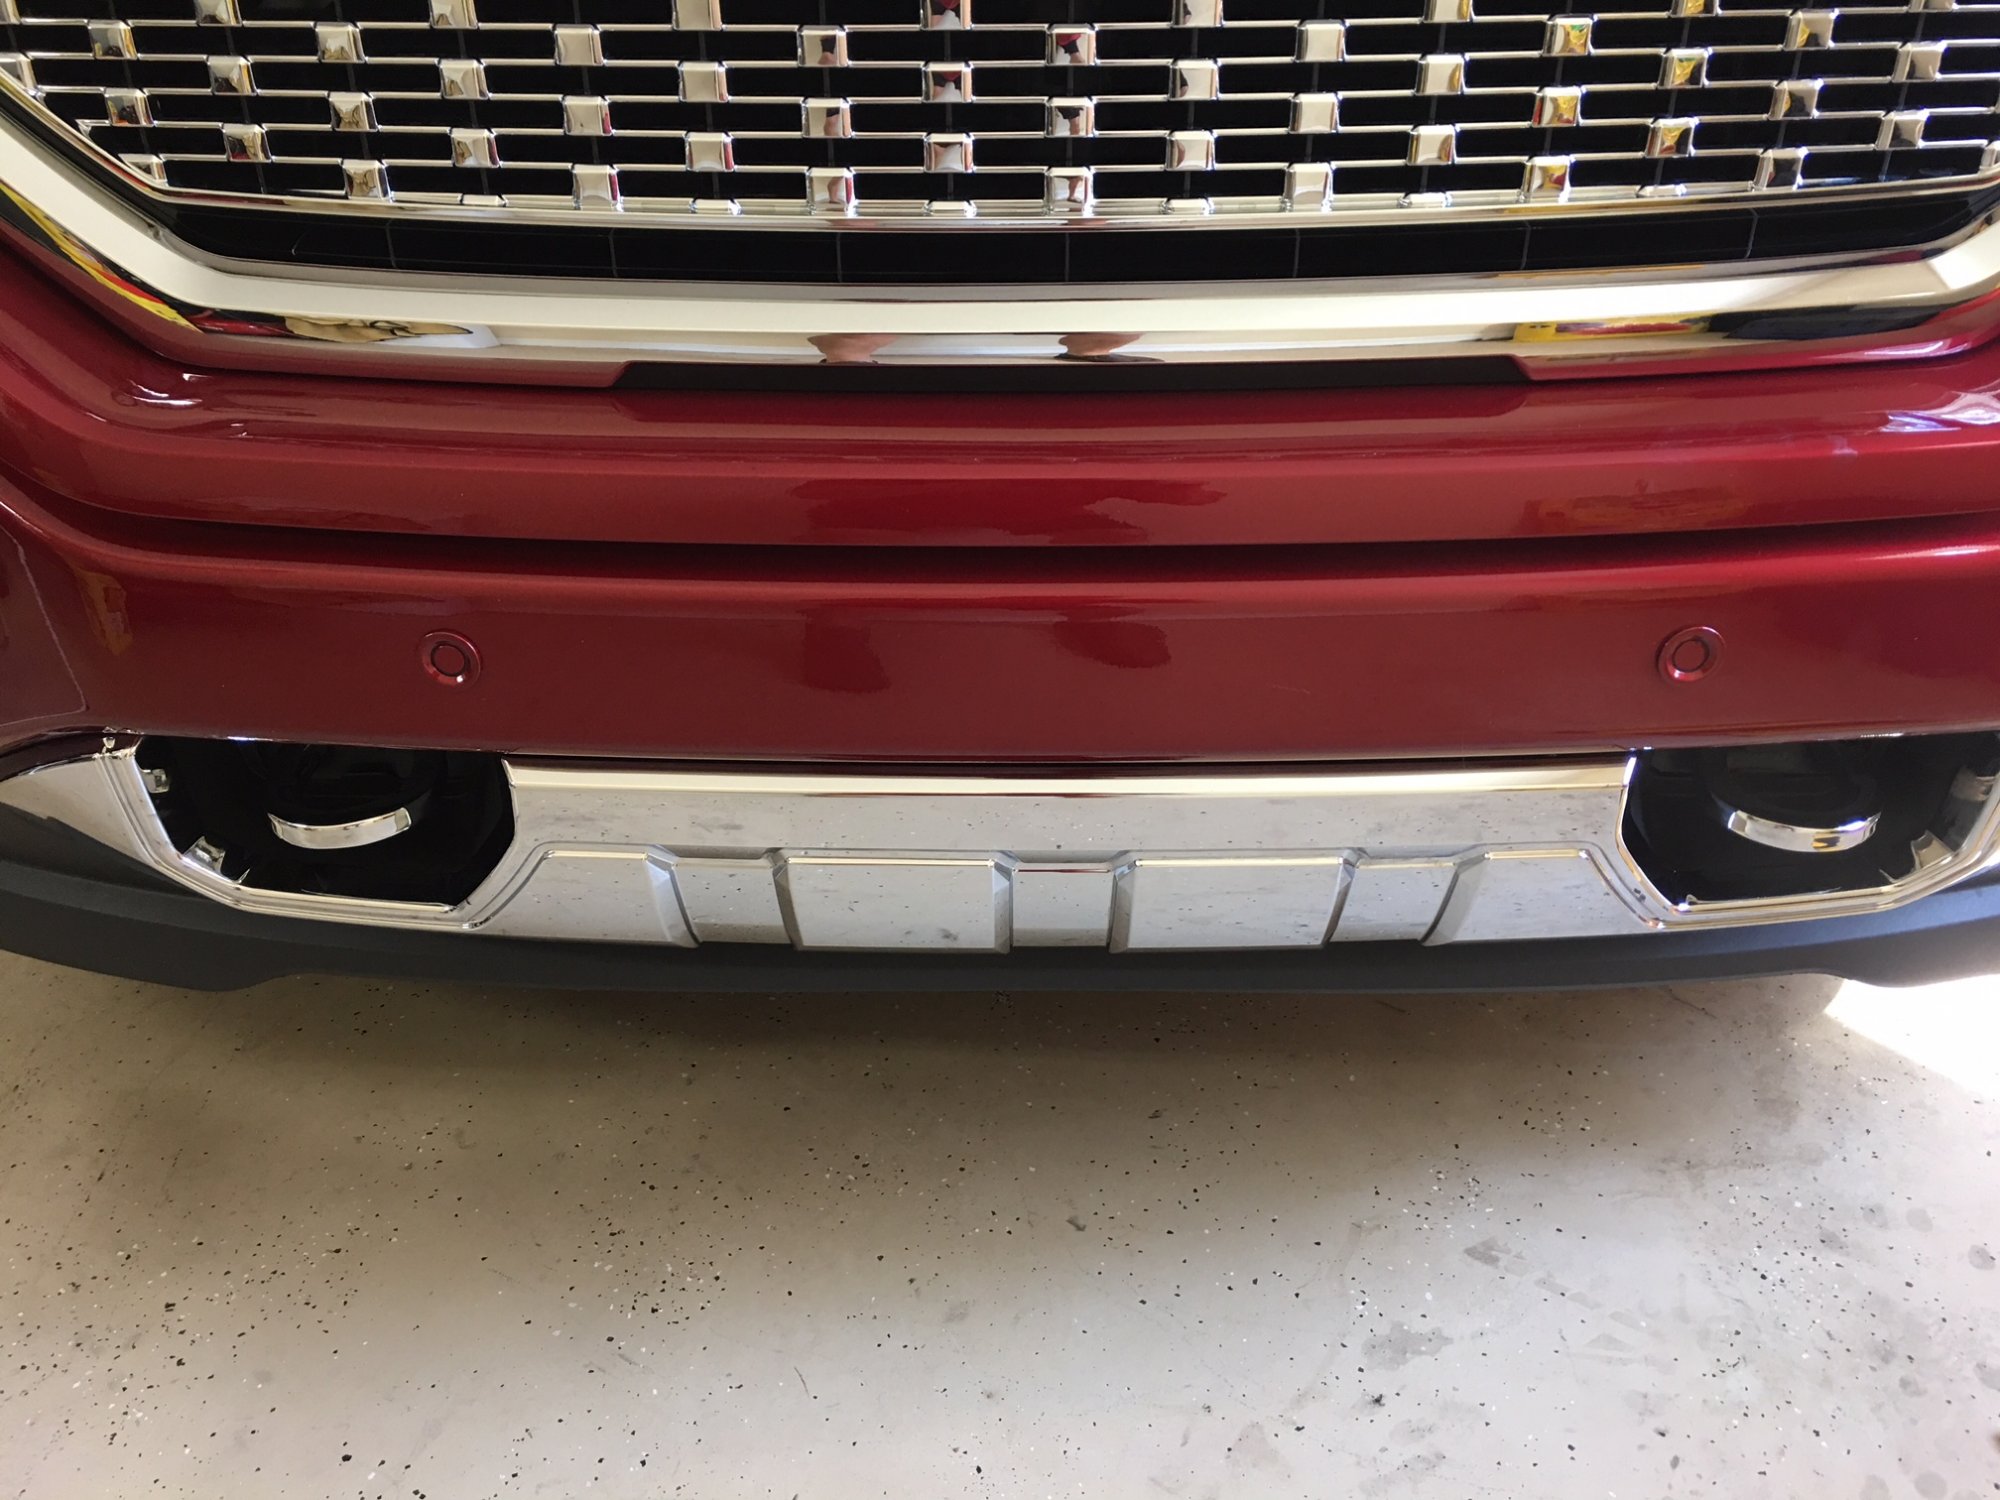 2015 Sierra 1500 Front Recovery to Tow Hooks, Chrome